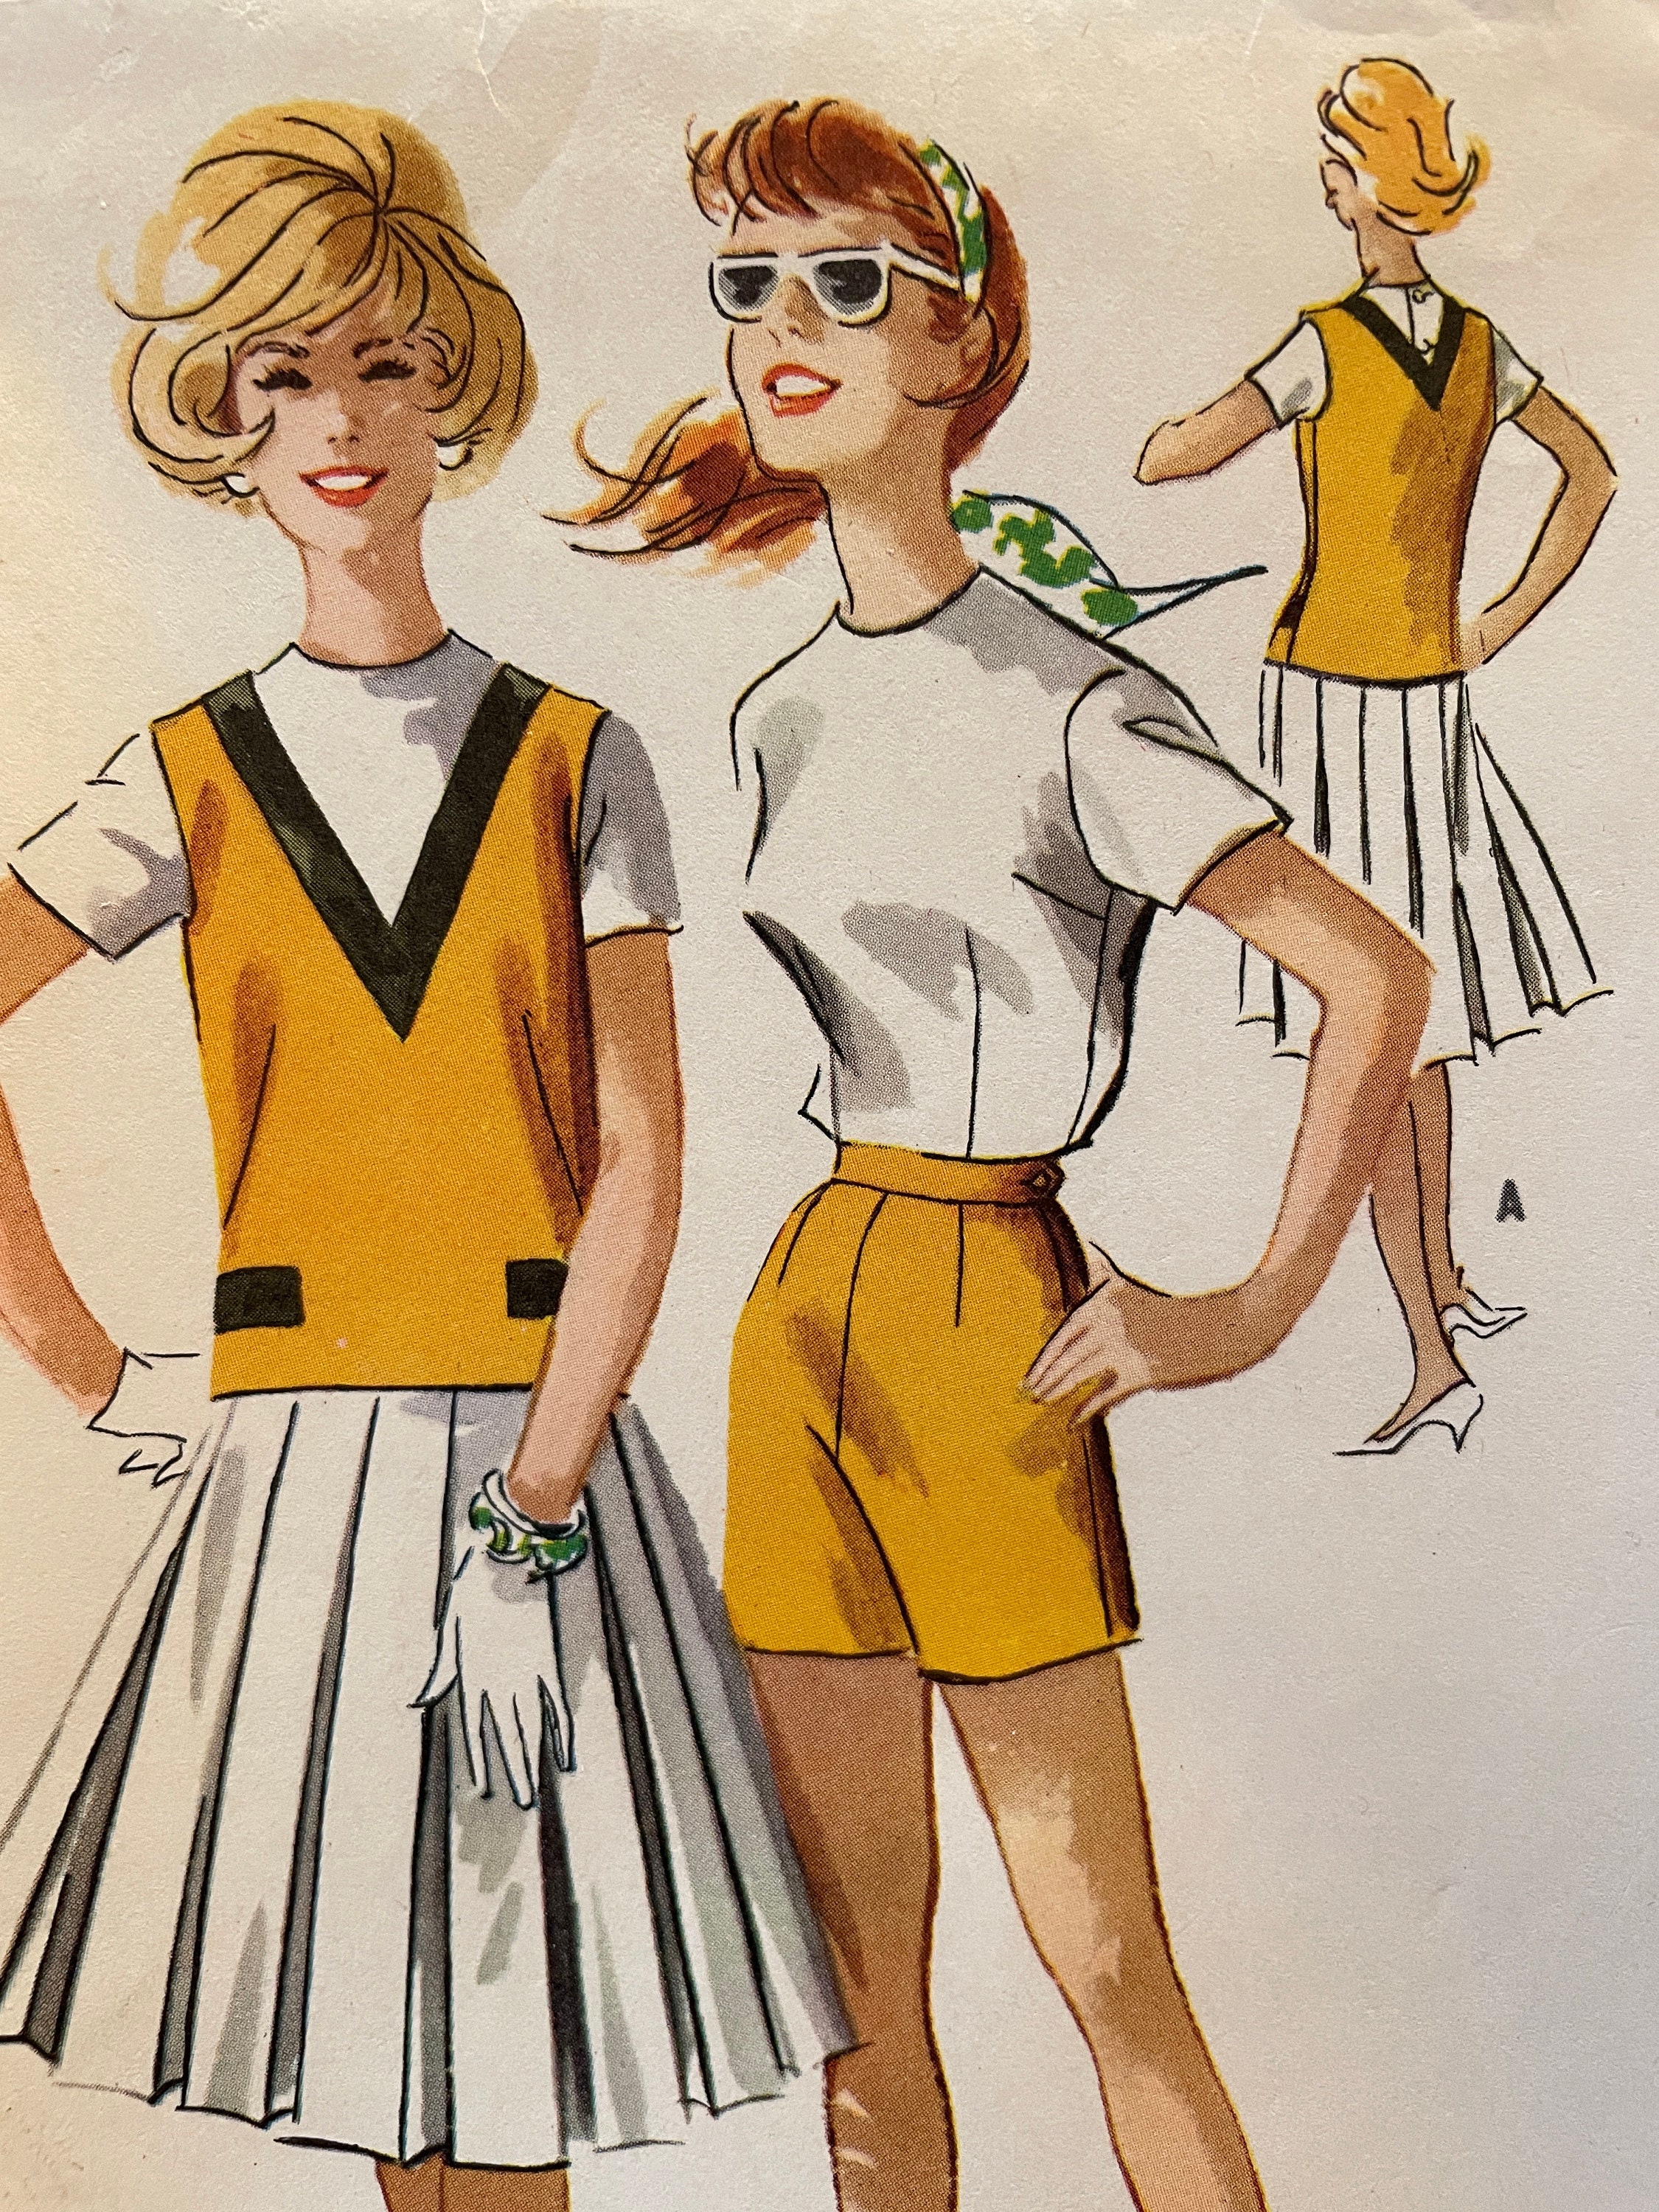 Vintage 1950's Sportswear Pattern With Pleated Skirt, Vest, Lined Top and  Shortsmccalls 4930size 10 Bust 31 UNCUT and Factory Folded 